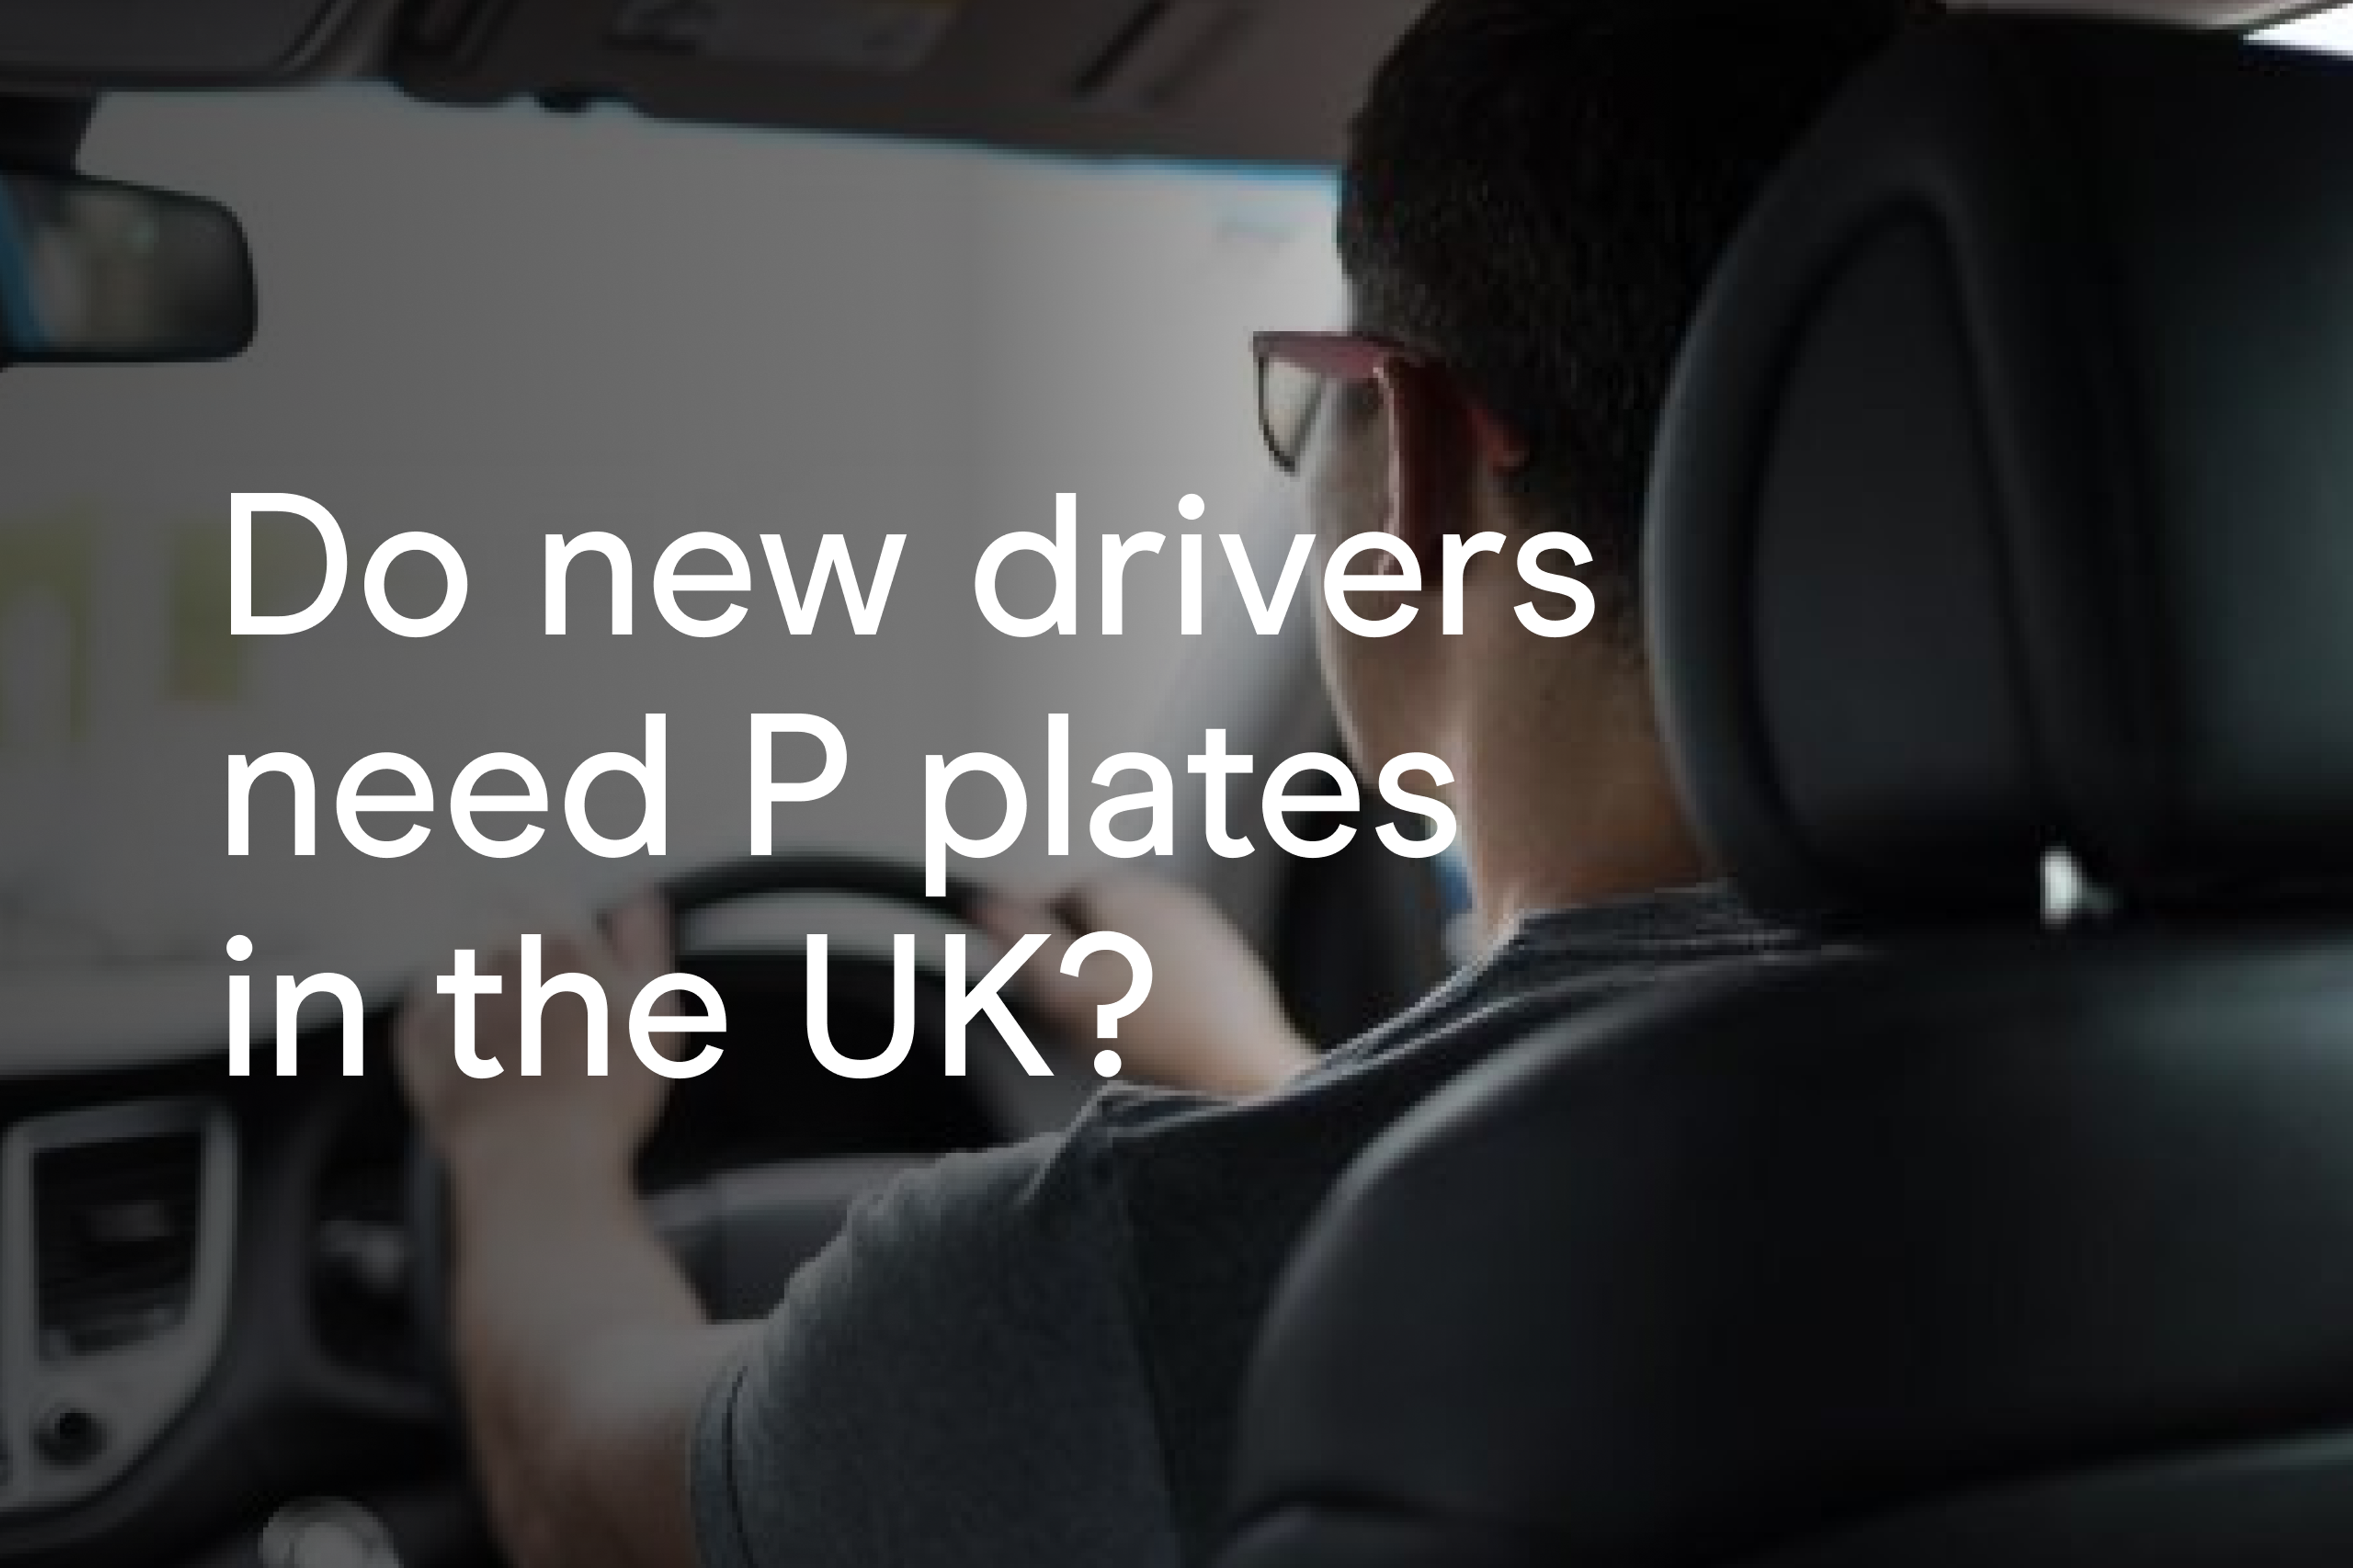 Do new drivers need P plates in the UK?